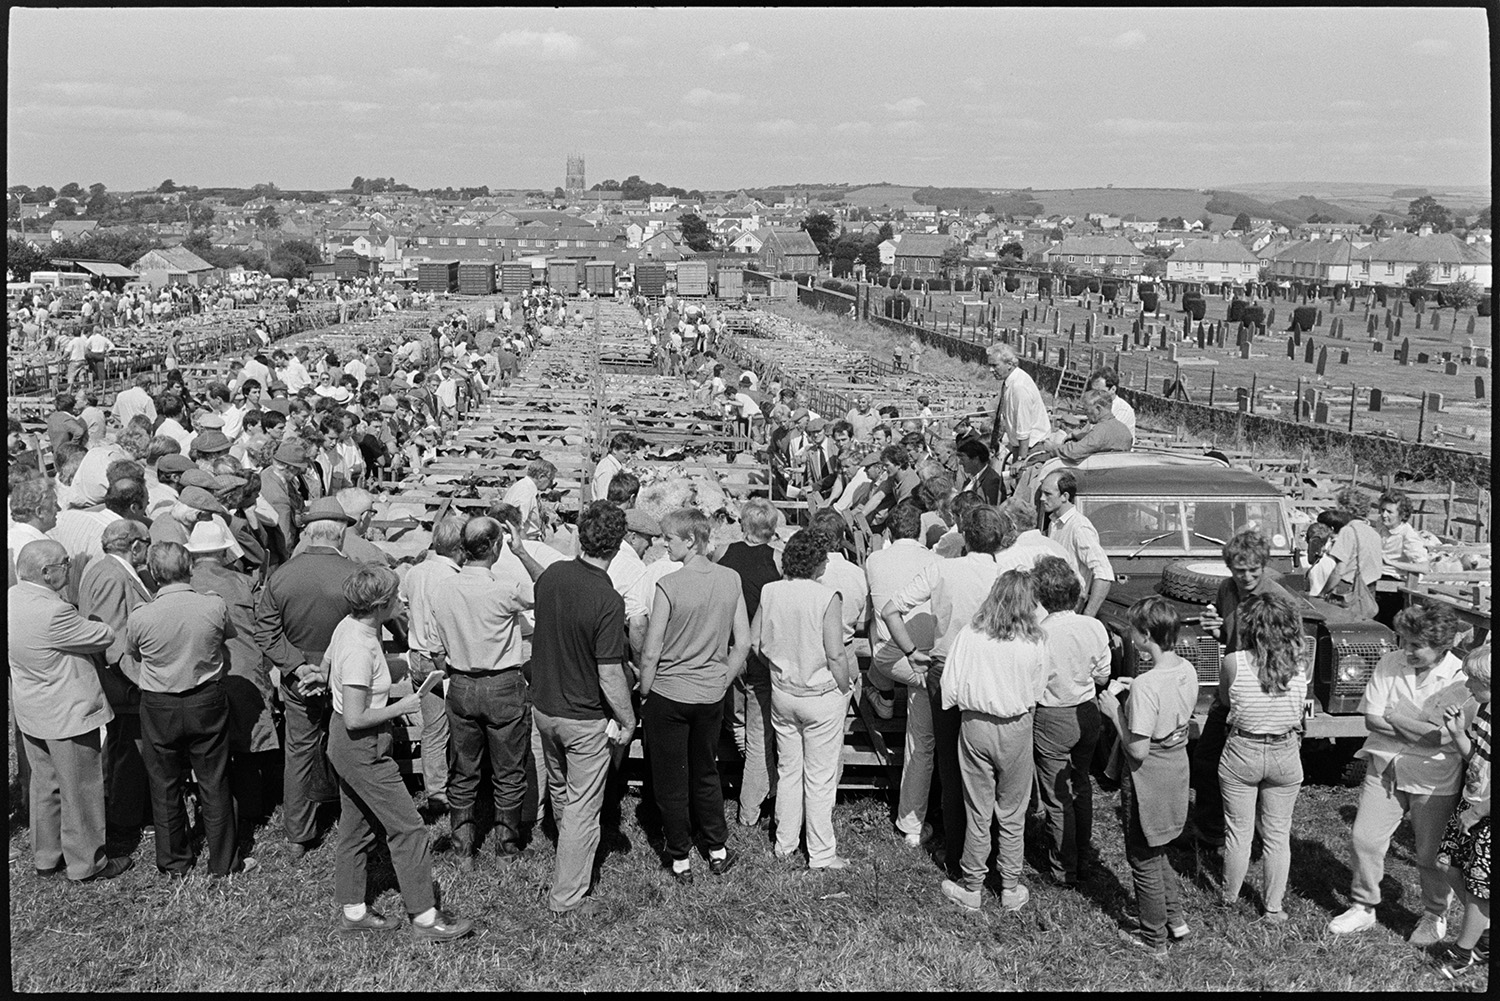 Sheep fair, farmers, auctioneers moving along pens of sheep on hot day. Overview towards town. 
[Men and women walking along rows of pens of sheep at South Molton Sheep fair. Auctioneers are stood in the back of a Land Rover in the foreground. Livestock lorries, a graveyard and the town of South Molton, including the church tower, are visible in the background.]